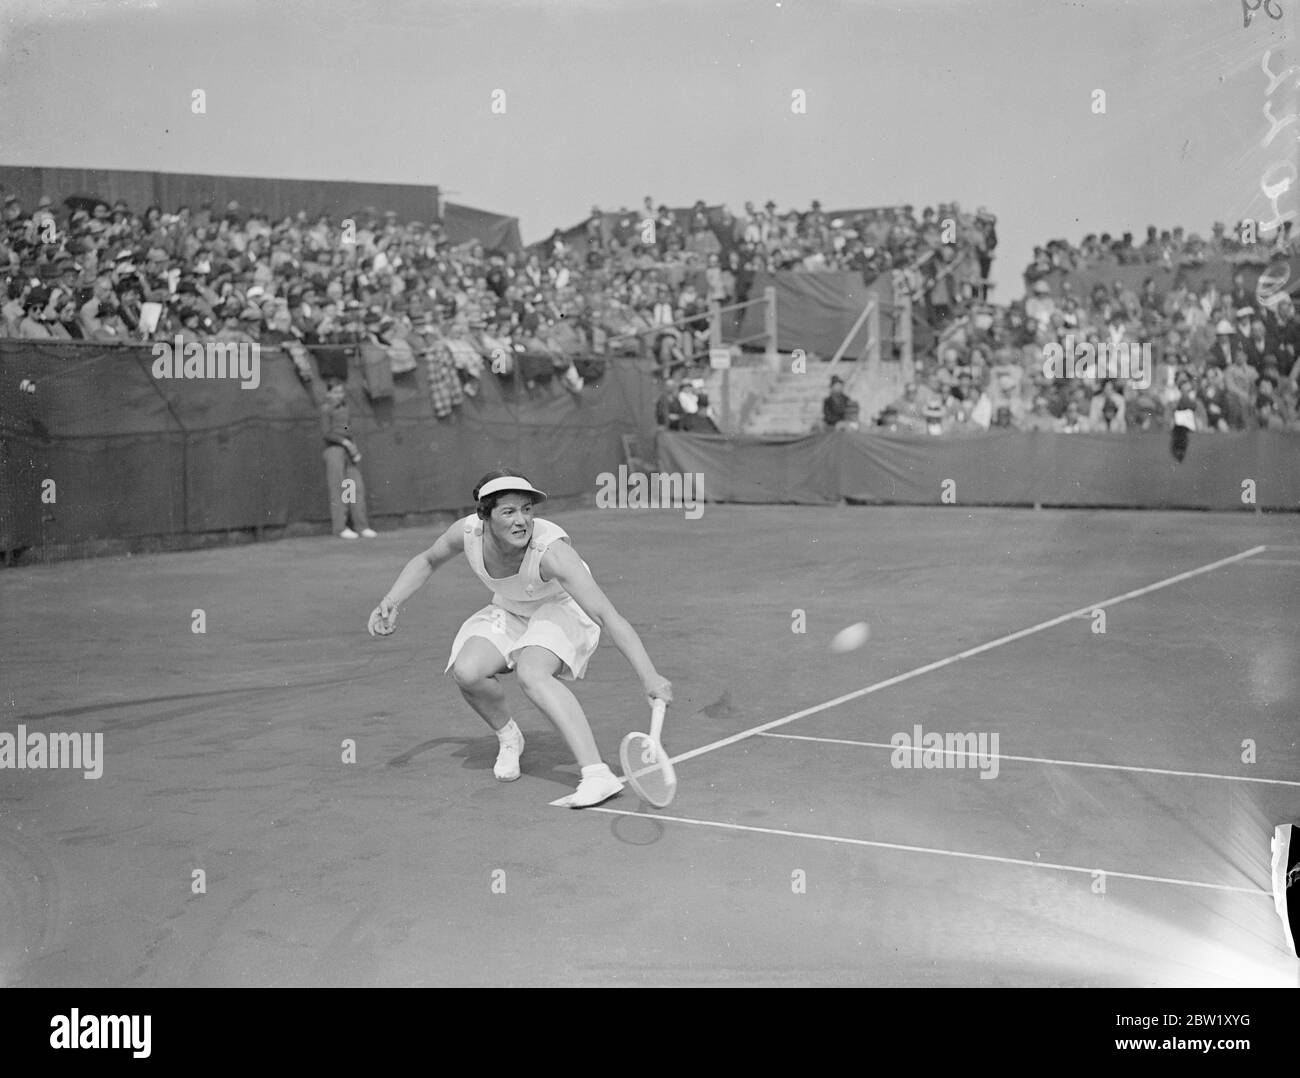 Miss Scriven beats Miss Hardwick in Bournemouth semifinals. Miss Scriven qualified to meet Señorita Lizana in the finals of the Bournemouth hardcourts championships by defeating Miss R M Hardwick 4-6, 6-2, 6-0. Photo shows, Miss Peggy Scriven in play against Miss Mary Hardwick. 30 April 1937 Stock Photo